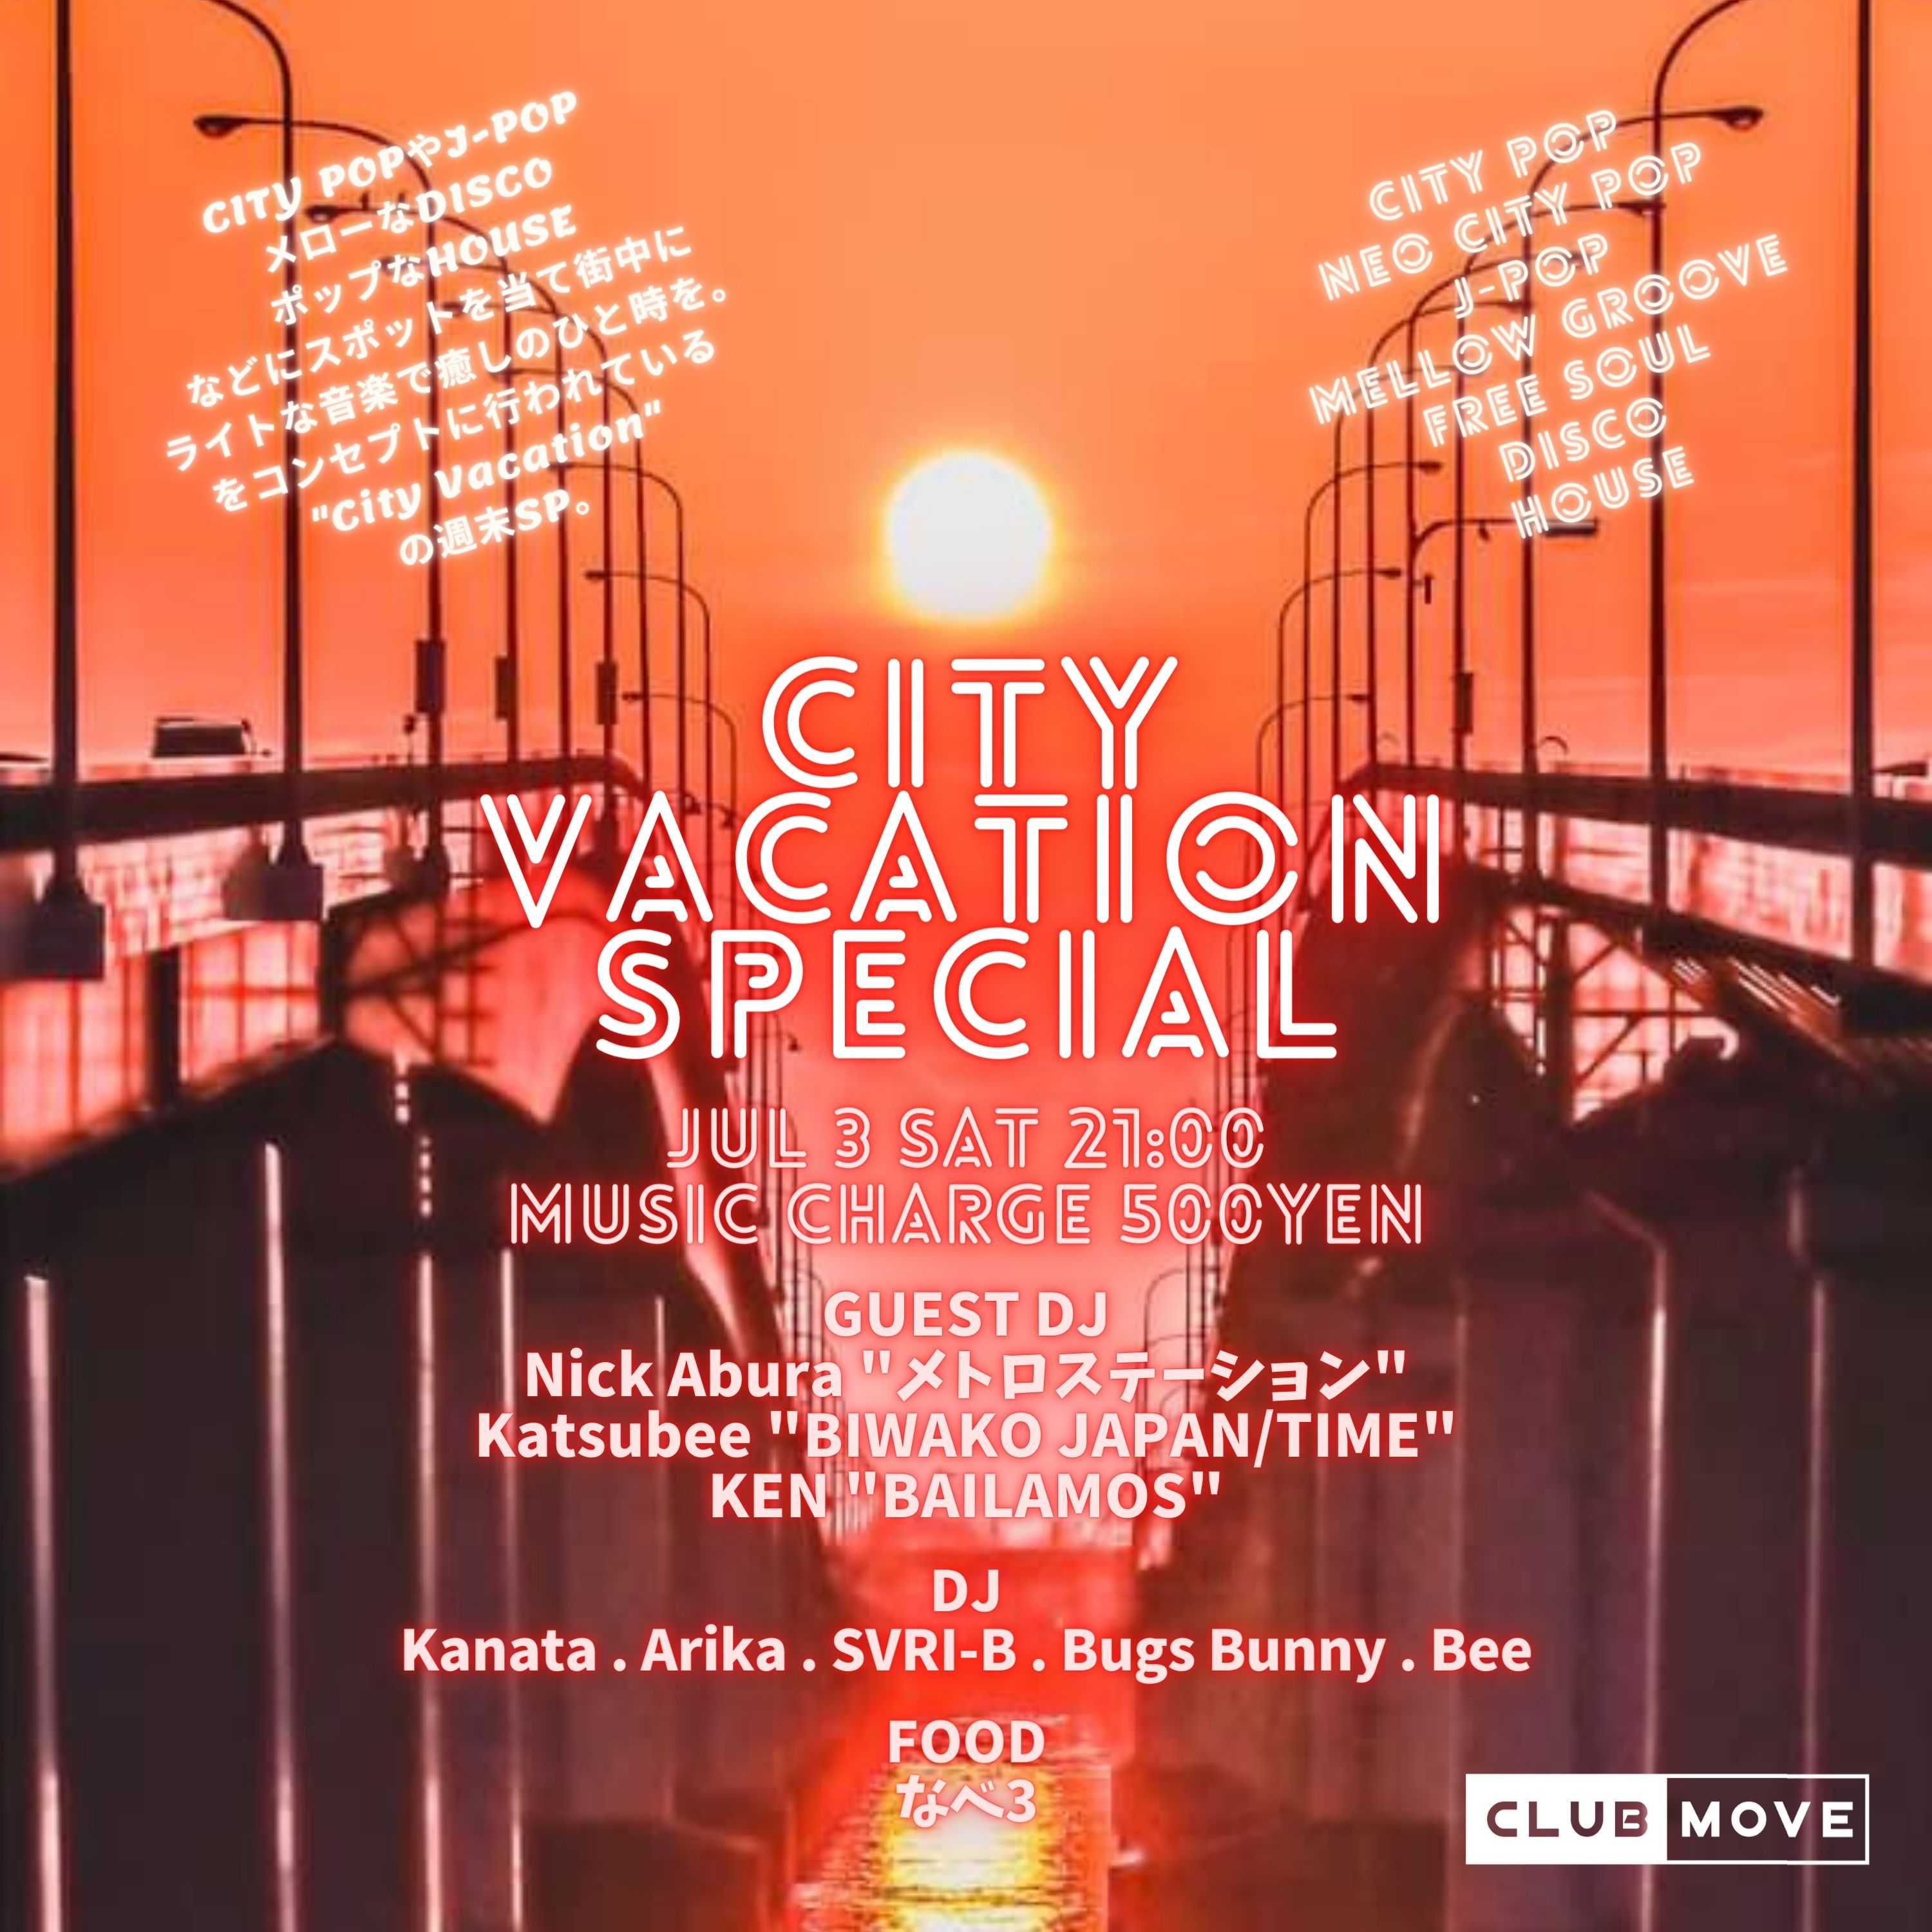 City Vacation Special